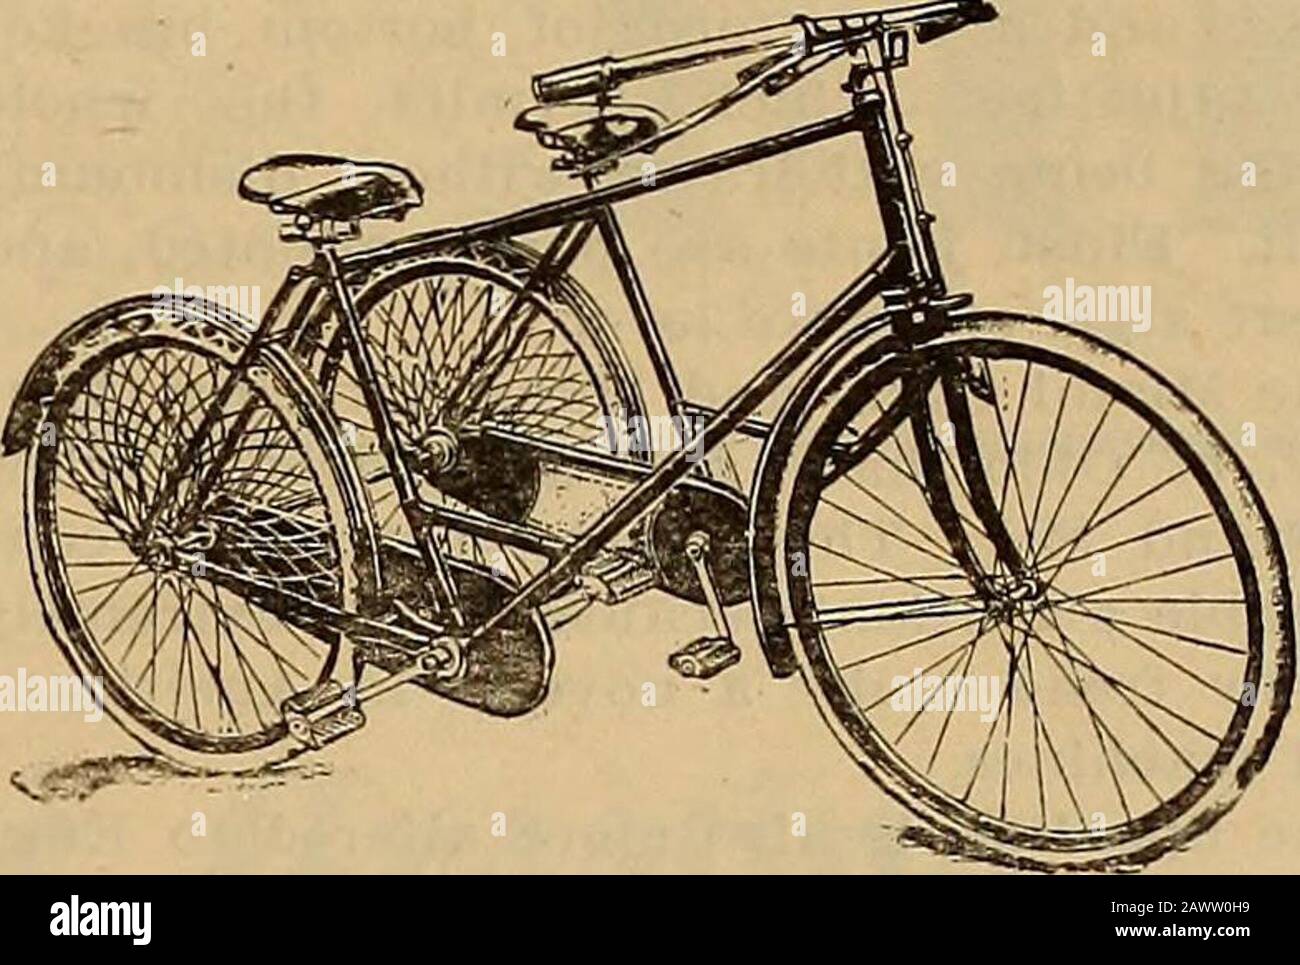 The Wheel and cycling trade review . x, RayS. Hofheins, Buffalo, N. Y. F. H. Allen, Syracuse, N. Y. W. Birdsall, Auburn, N. Y. Dr. A. I. Brown, Cleveland, Ohio. Phil Nichel, Milwaukee, Wis. Fill Church, Toledo, Ohio. C. T. Wolcott, Gibsonville, Ohio. F. A. Church, Toledo, Ohio. John Hunter, Albion, Mich. Harry T. Tudhope, Port Huron, Mich. F. E. Hendrich, Danville, 111. O. A. Schlitz, Canton, 111. , Henry Trapp, Lincoln, 111. For knowingly competing in handicap race nothandicapped by the official handicapper, D. F.Carmichael, St. Paul, Minn., is suspended fromall track racing for ninety days f Stock Photo